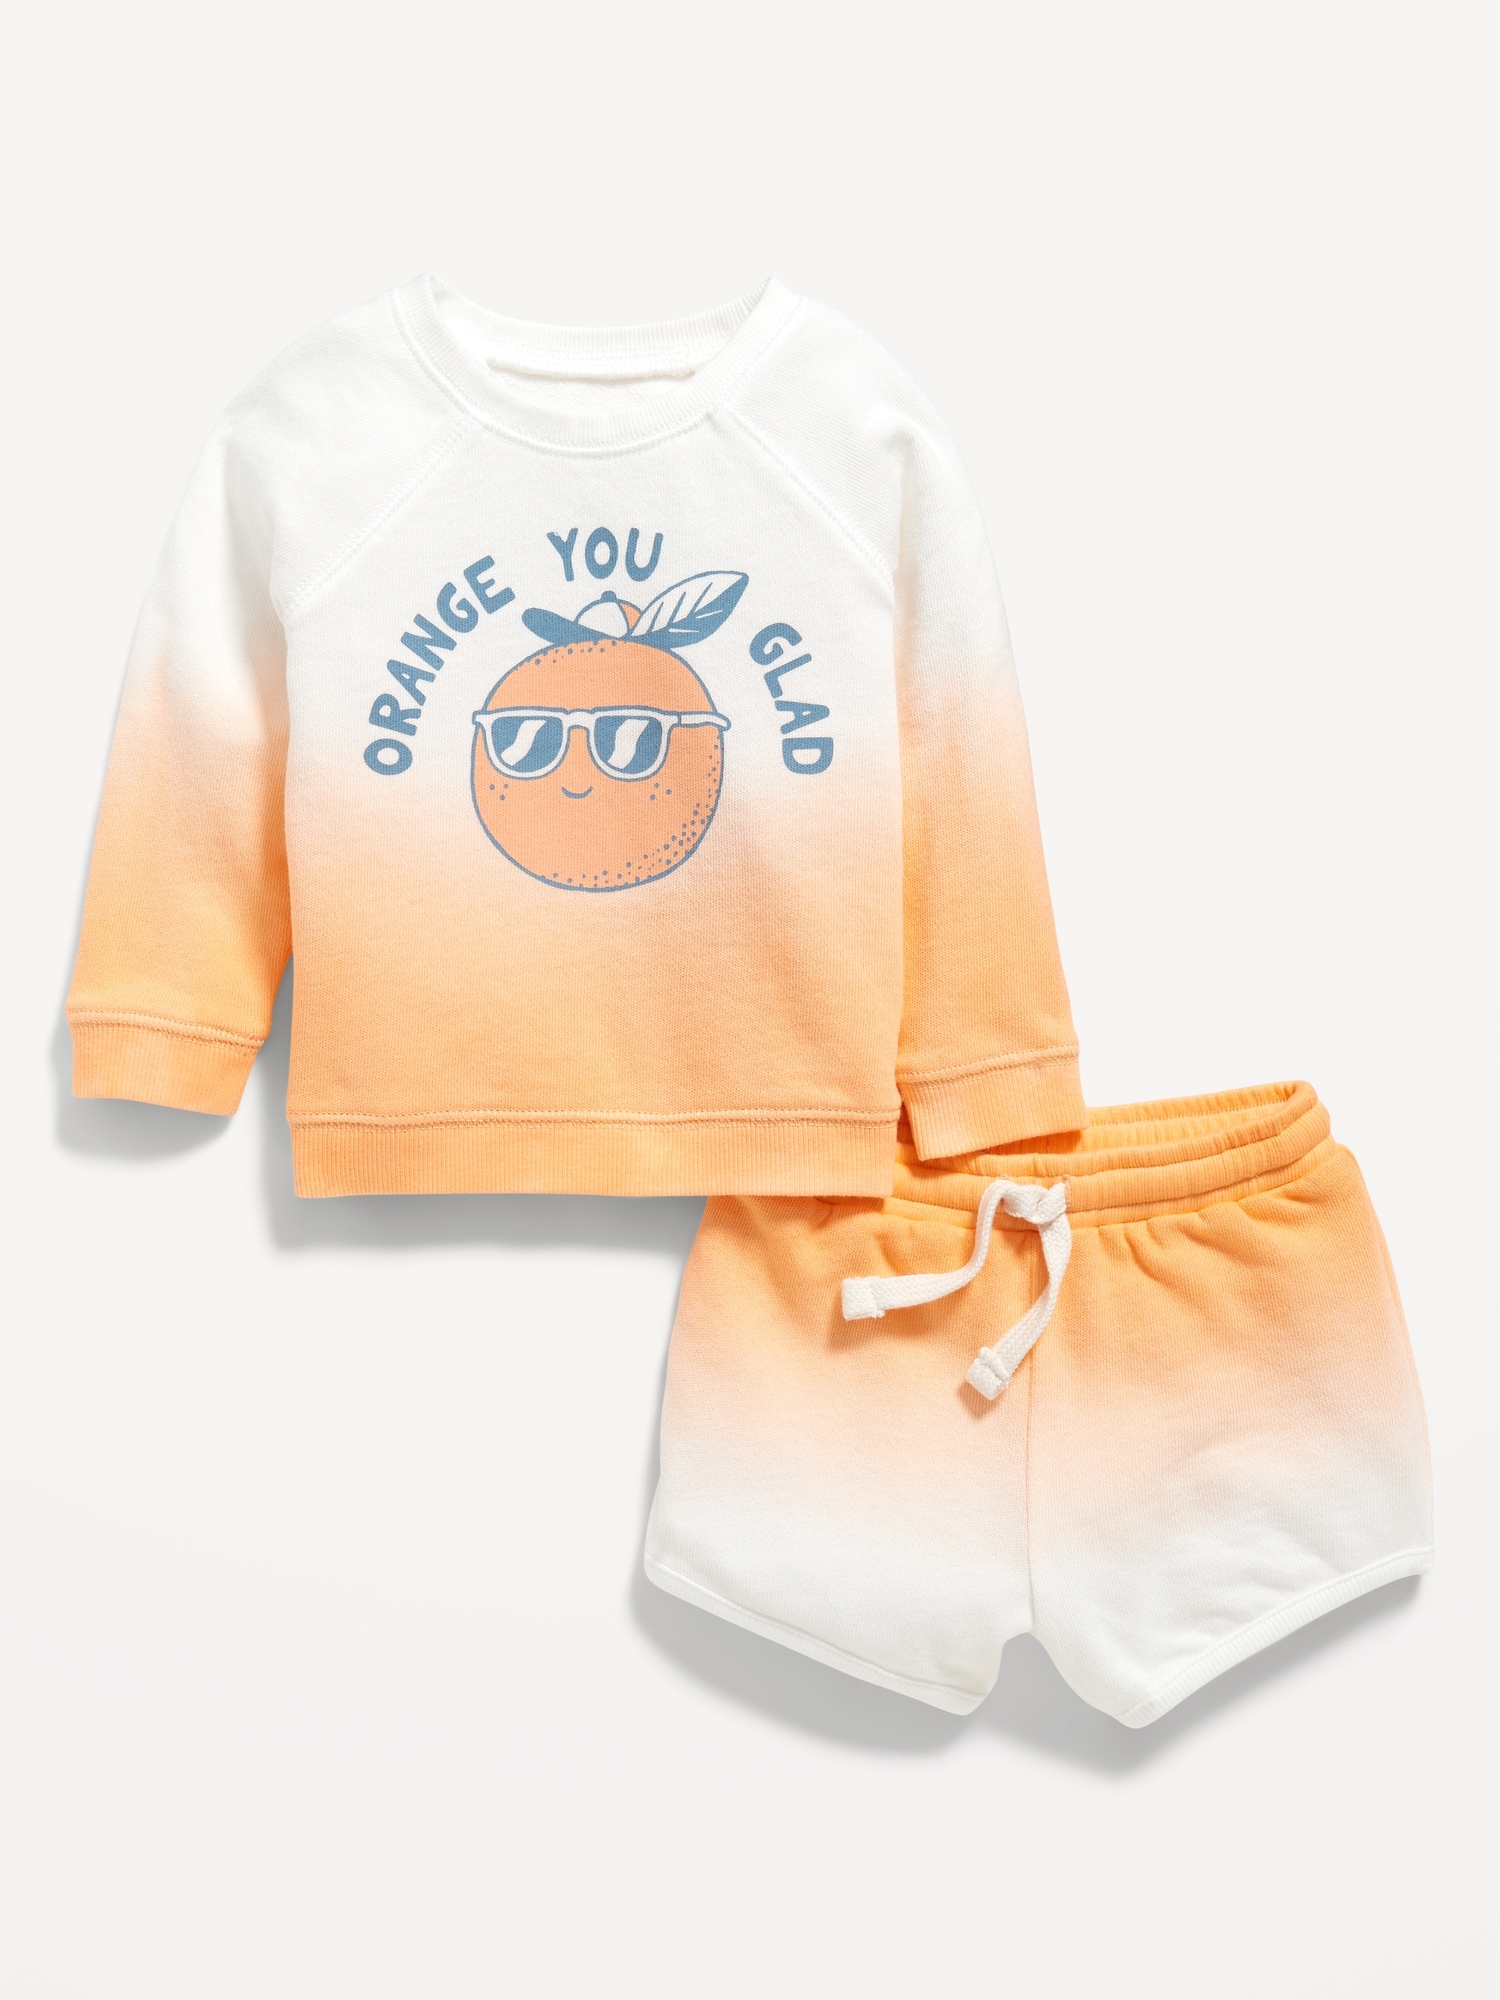 French Terry Graphic Sweatshirt and Shorts Set for Baby Hot Deal